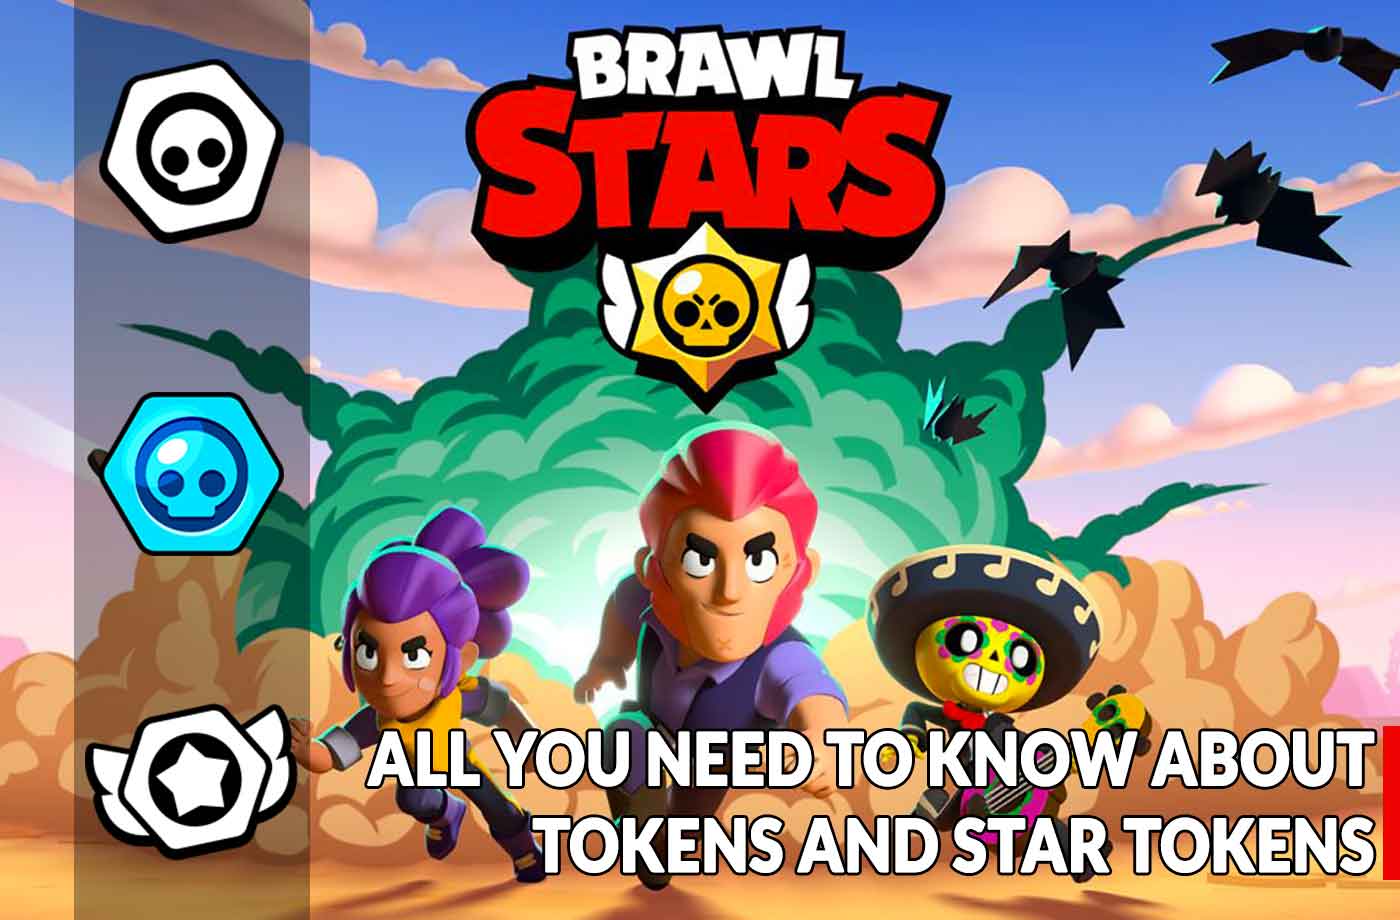 Guide Brawl Stars How To Quickly Gain Tokens And Star Tokens Kill The Game - jeu supercell brawl star sortie